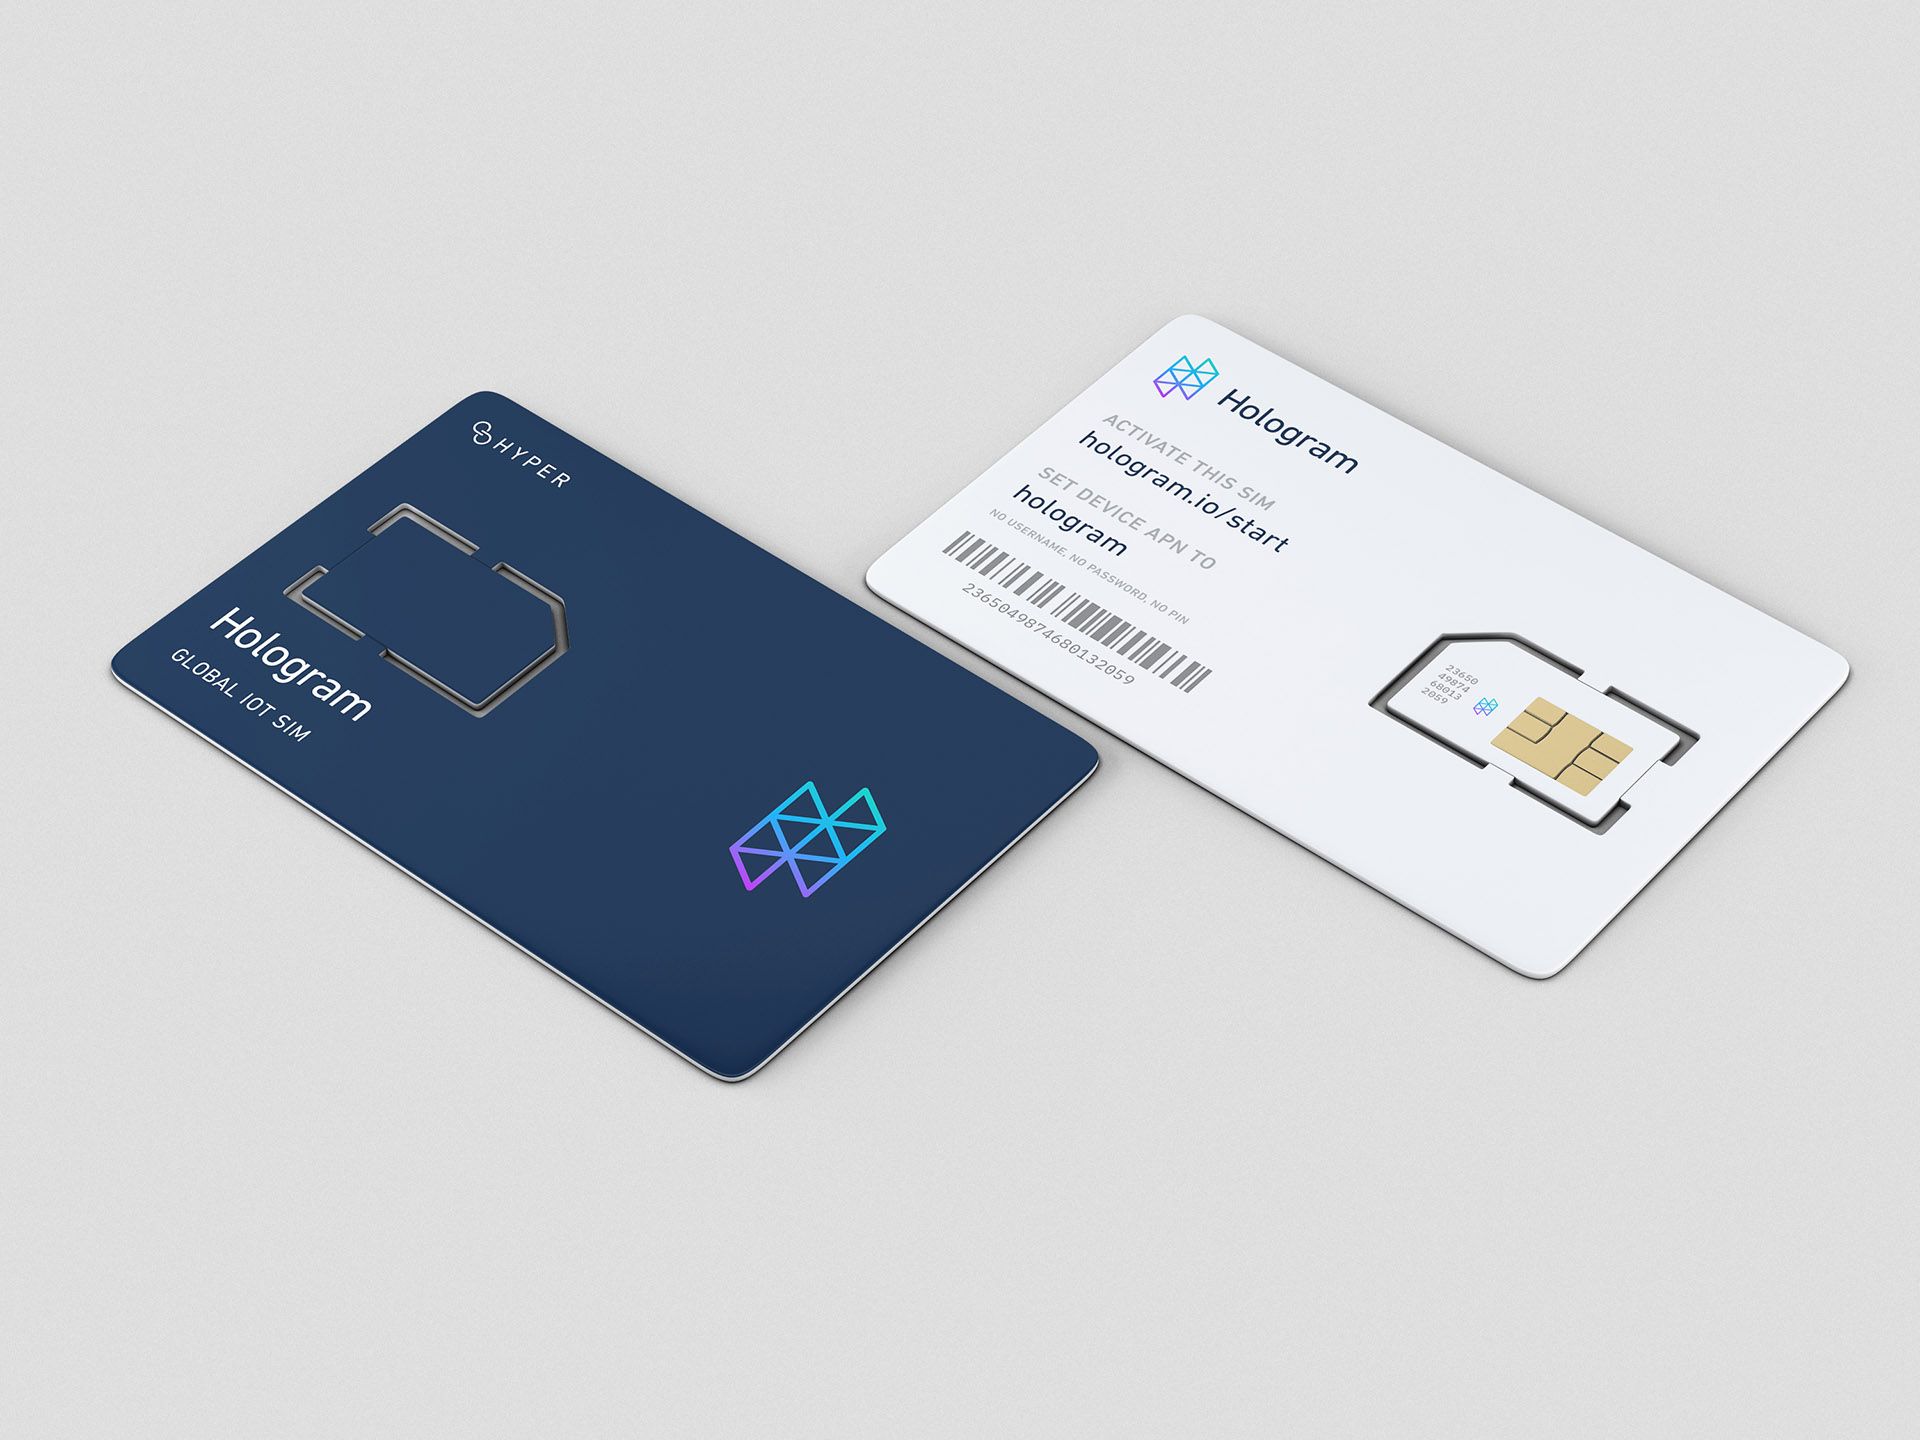 Two Hologram SIM cards sit on a countertop